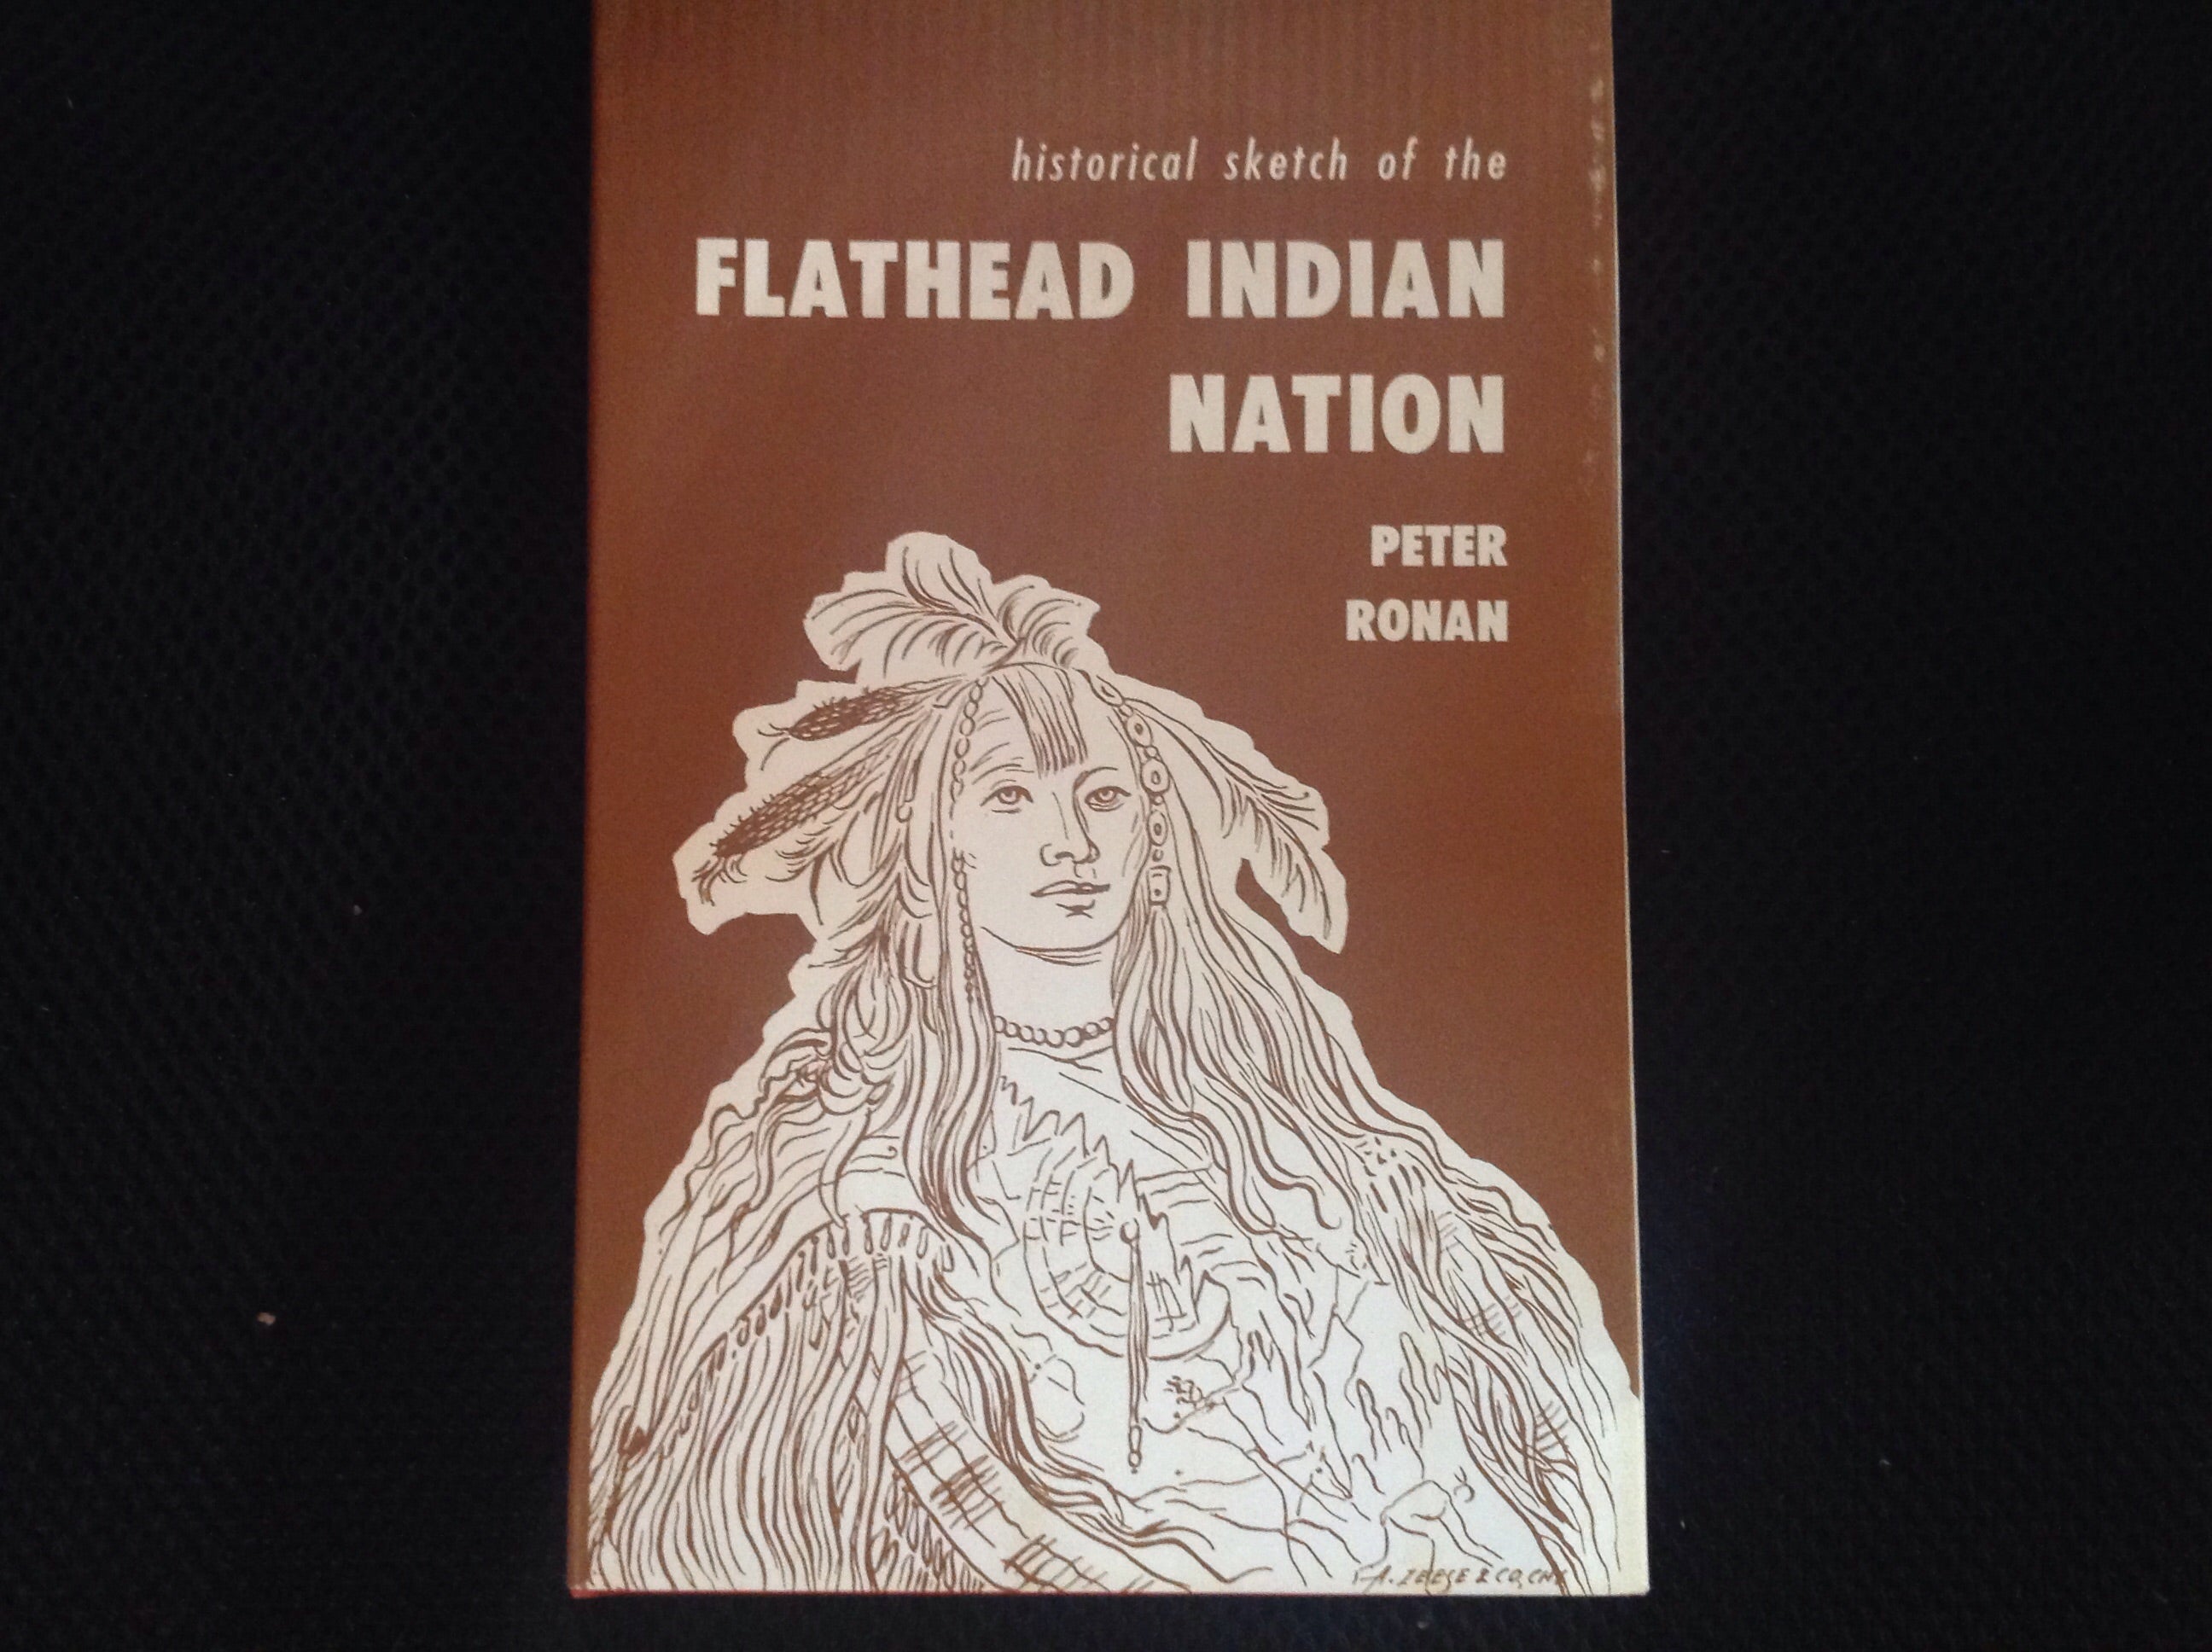 BOOKS - historical sketch of the FLATHEAD INDIAN NATION - 1890